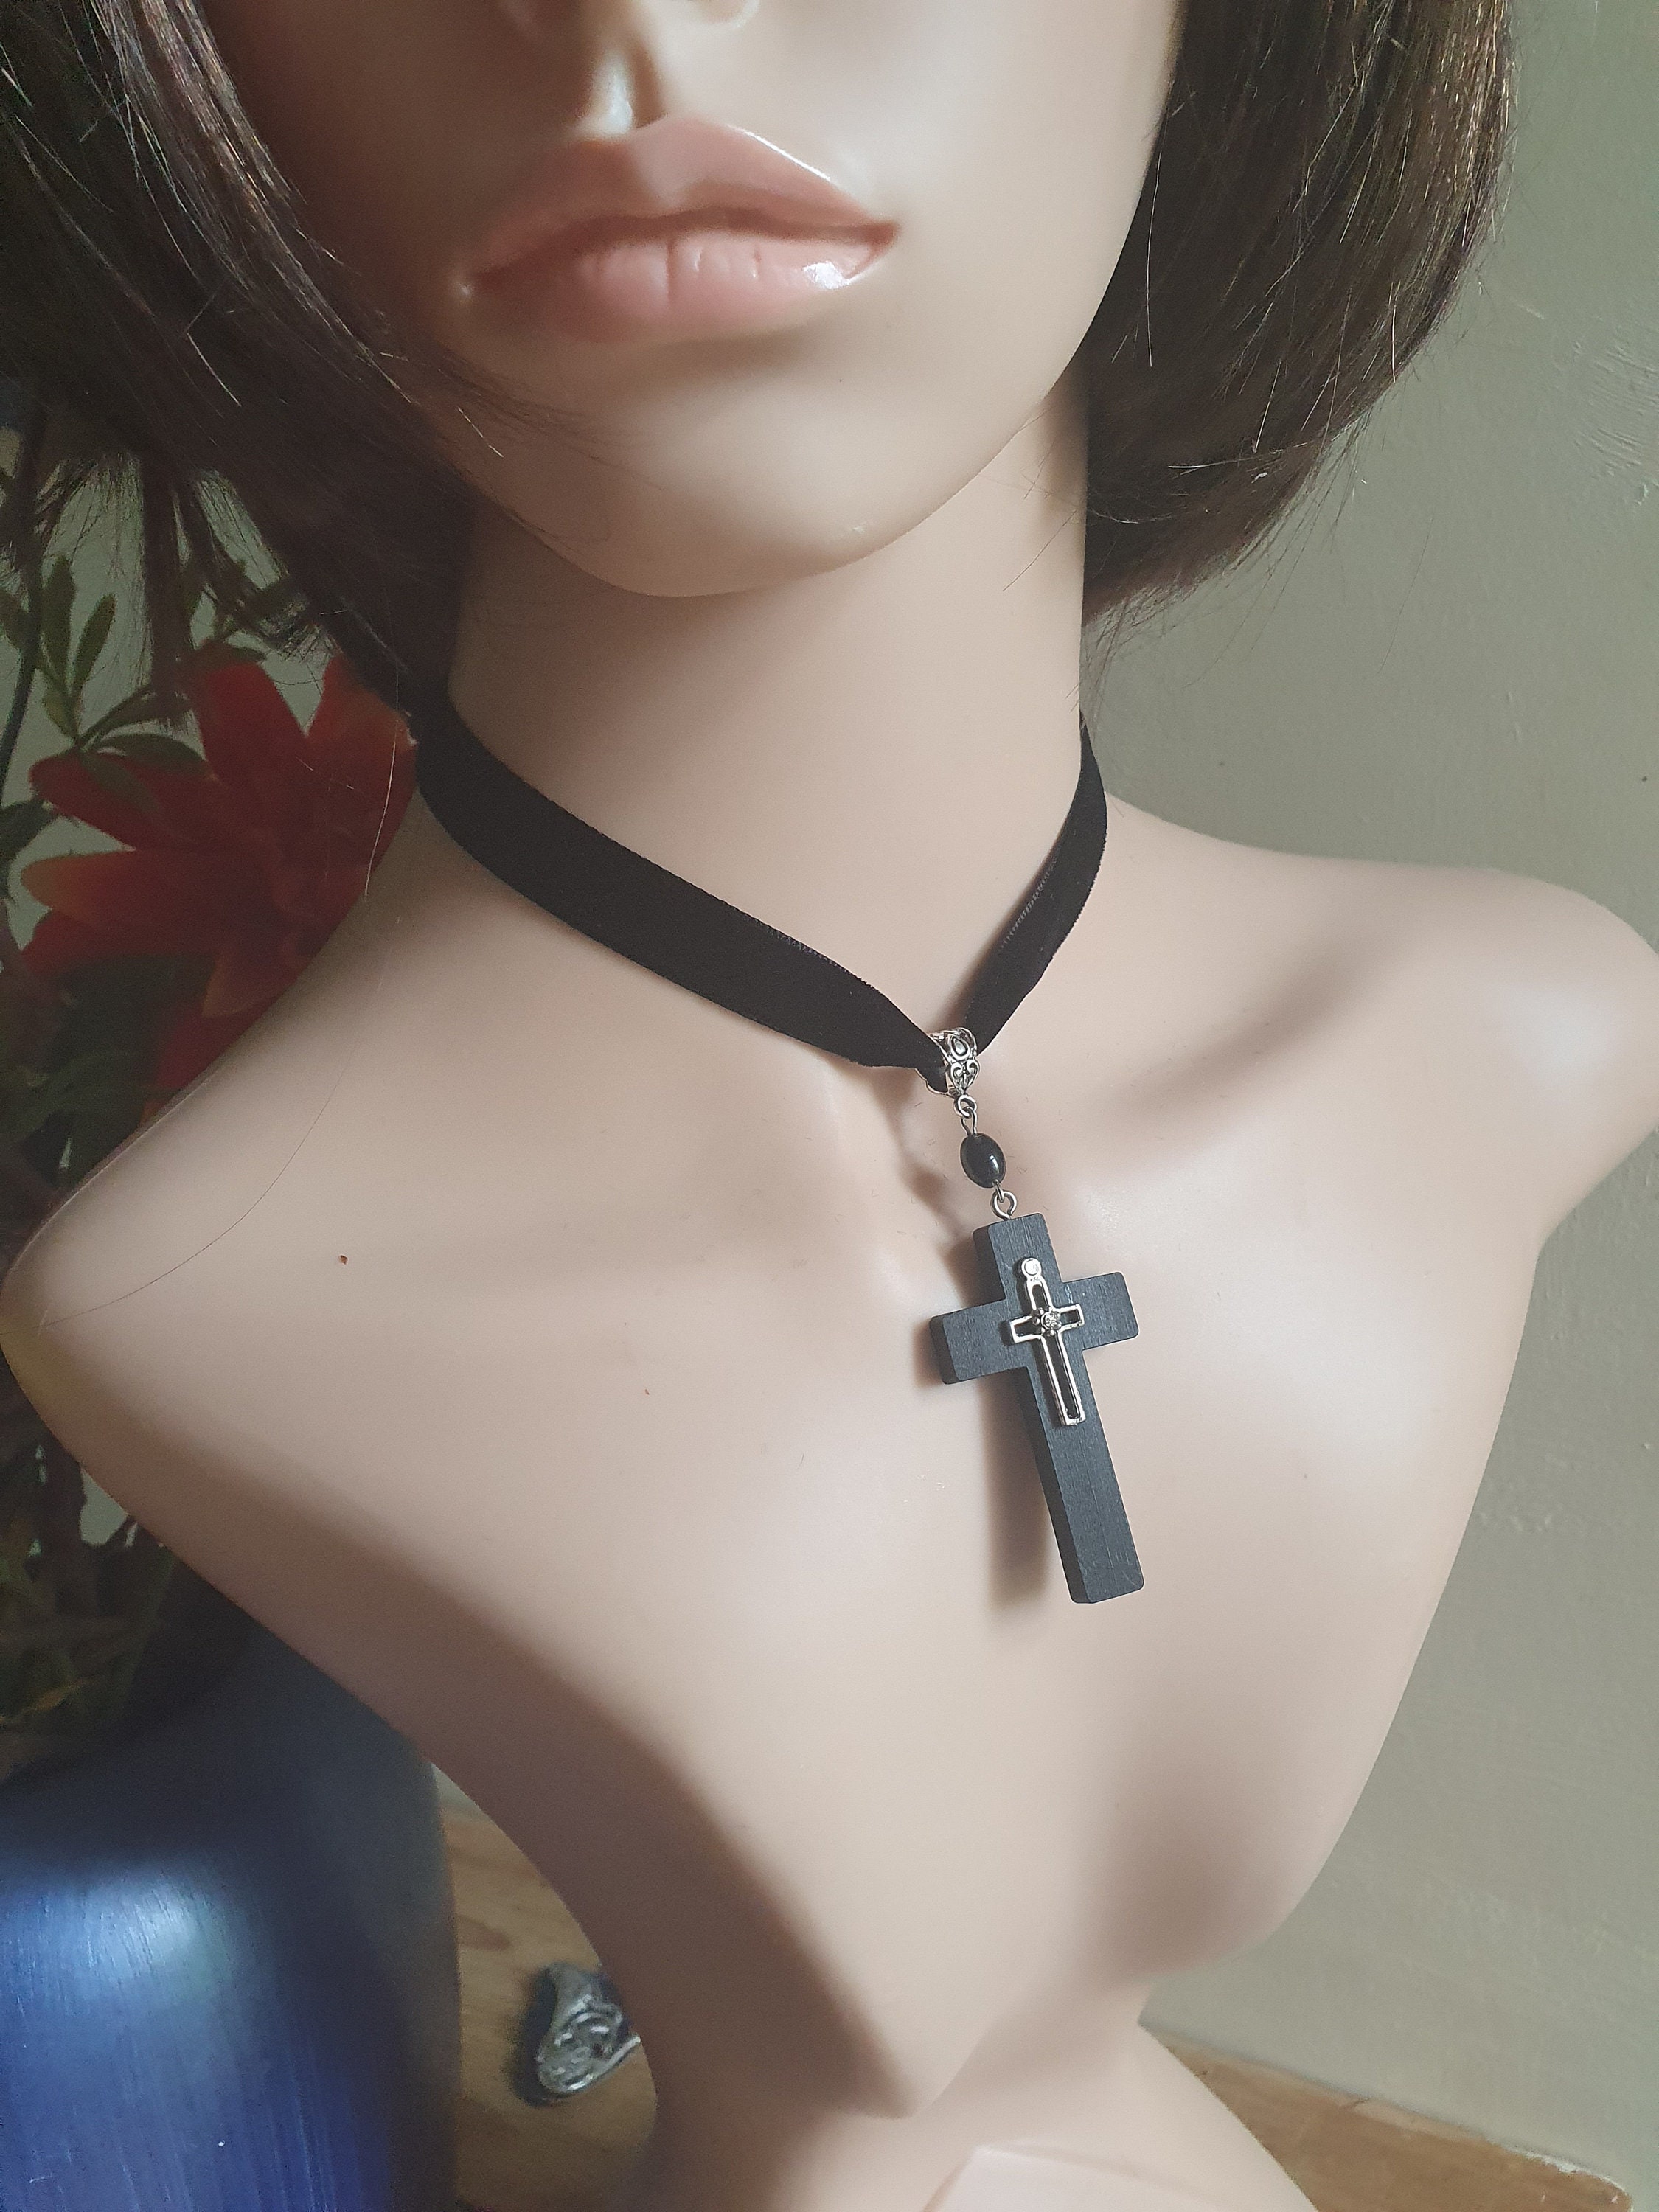 Wood Cross Necklace for Men & Women, Adjustable Leather Cord With Wooden  Cross Pendant, Gift for Catholic Boy, Christian Cross Choker, Psalm 